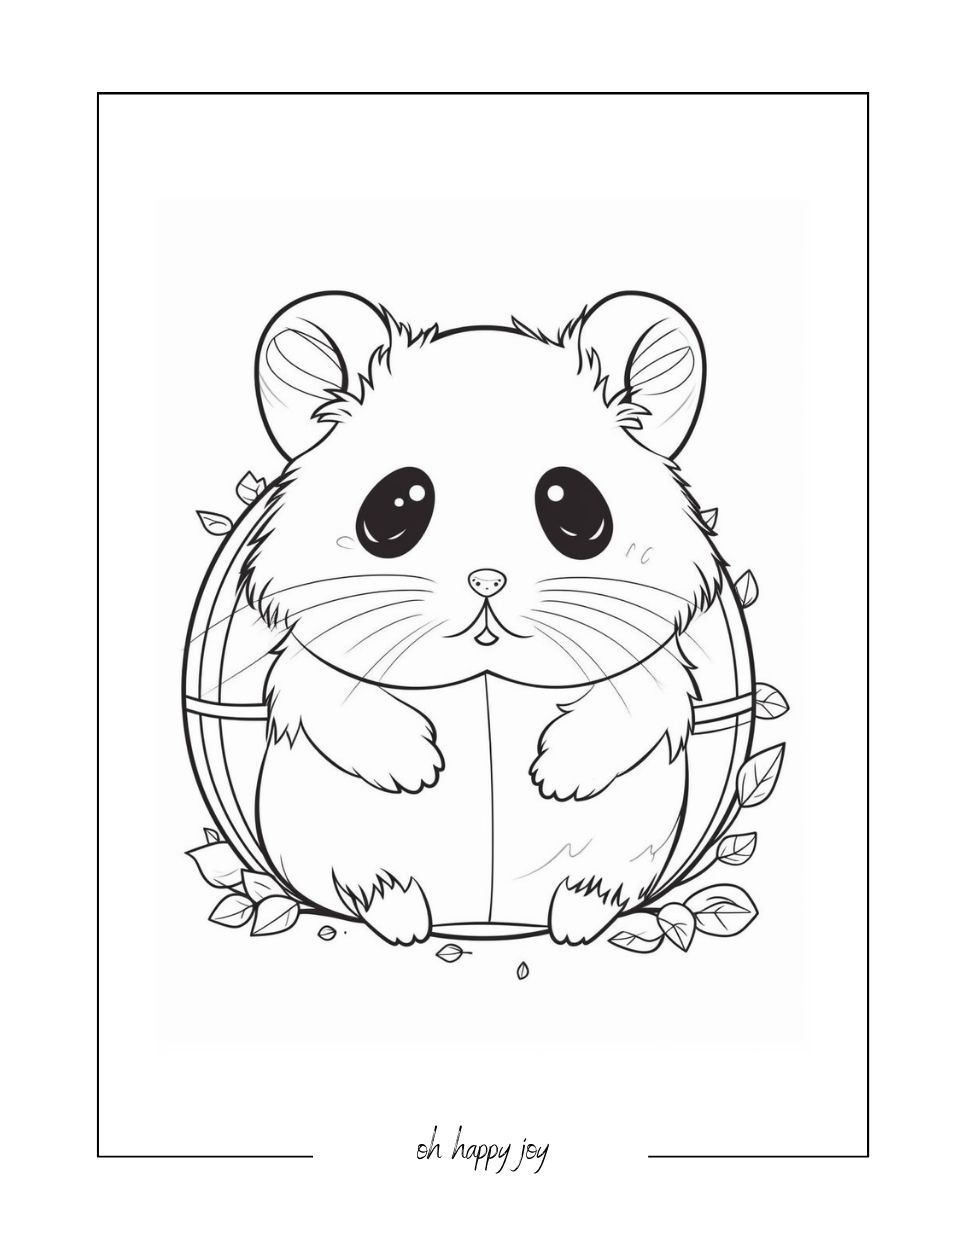 Shy squishmallow coloring page